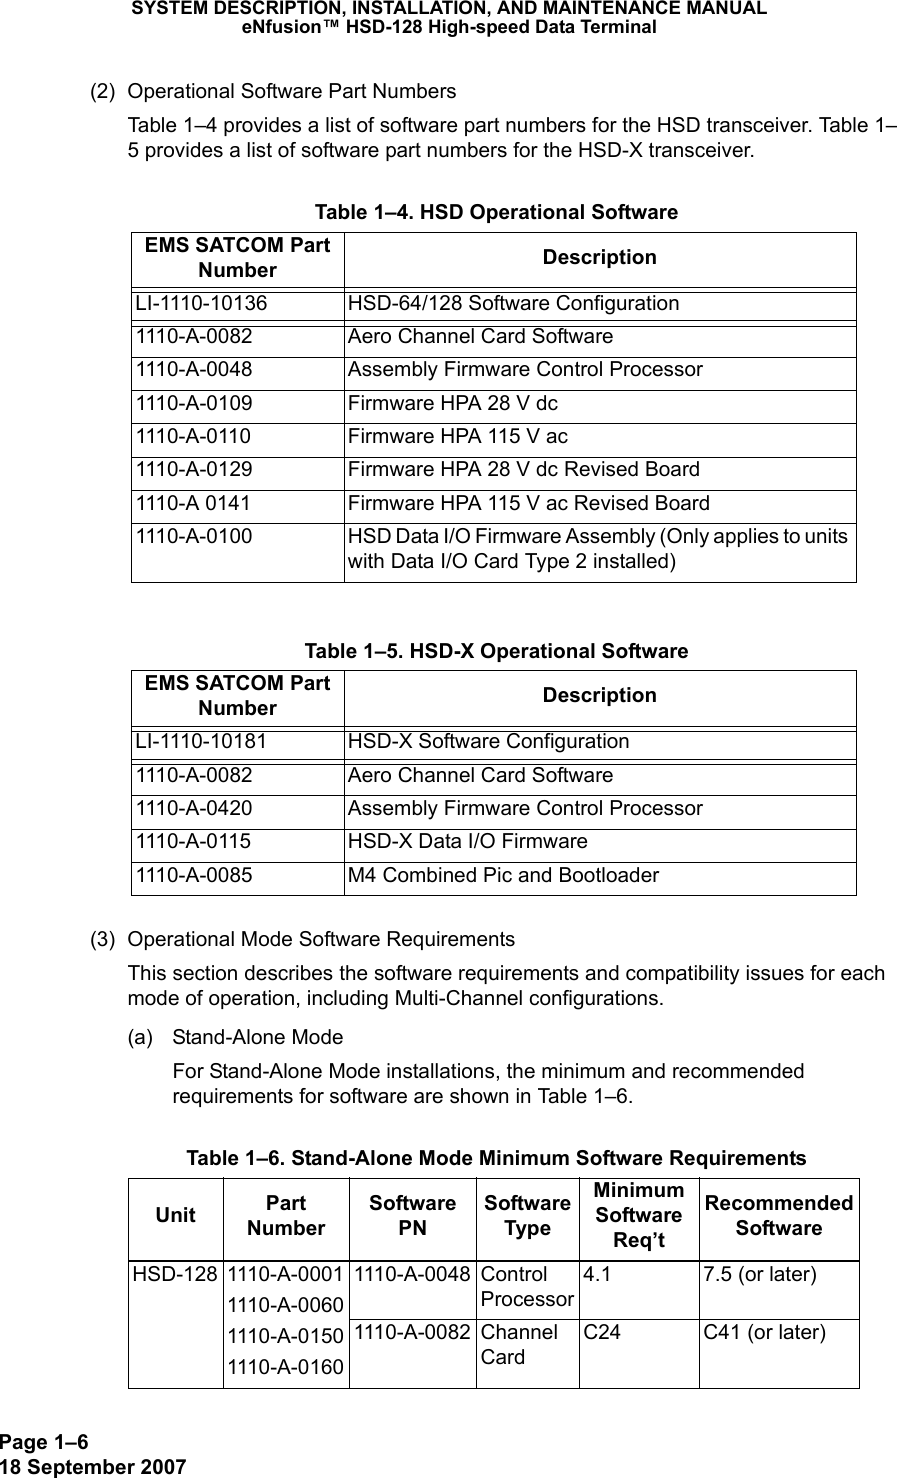 Page 1–618 September 2007SYSTEM DESCRIPTION, INSTALLATION, AND MAINTENANCE MANUALeNfusion™ HSD-128 High-speed Data Terminal(2) Operational Software Part NumbersTable 1–4 provides a list of software part numbers for the HSD transceiver. Table 1–5 provides a list of software part numbers for the HSD-X transceiver. (3) Operational Mode Software RequirementsThis section describes the software requirements and compatibility issues for each mode of operation, including Multi-Channel configurations. (a) Stand-Alone Mode For Stand-Alone Mode installations, the minimum and recommended requirements for software are shown in Table 1–6. Table 1–4. HSD Operational SoftwareEMS SATCOM Part Number DescriptionLI-1110-10136 HSD-64/128 Software Configuration 1110-A-0082 Aero Channel Card Software1110-A-0048  Assembly Firmware Control Processor1110-A-0109 Firmware HPA 28 V dc1110-A-0110 Firmware HPA 115 V ac1110-A-0129 Firmware HPA 28 V dc Revised Board1110-A 0141 Firmware HPA 115 V ac Revised Board1110-A-0100 HSD Data I/O Firmware Assembly (Only applies to units with Data I/O Card Type 2 installed) Table 1–5. HSD-X Operational SoftwareEMS SATCOM Part Number DescriptionLI-1110-10181 HSD-X Software Configuration 1110-A-0082 Aero Channel Card Software1110-A-0420  Assembly Firmware Control Processor1110-A-0115 HSD-X Data I/O Firmware1110-A-0085 M4 Combined Pic and Bootloader Table 1–6. Stand-Alone Mode Minimum Software RequirementsUnit Part Number Software PNSoftware TypeMinimum Software Req’t Recommended SoftwareHSD-128 1110-A-00011110-A-00601110-A-01501110-A-01601110-A-0048 Control Processor4.1 7.5 (or later)1110-A-0082 Channel CardC24 C41 (or later)